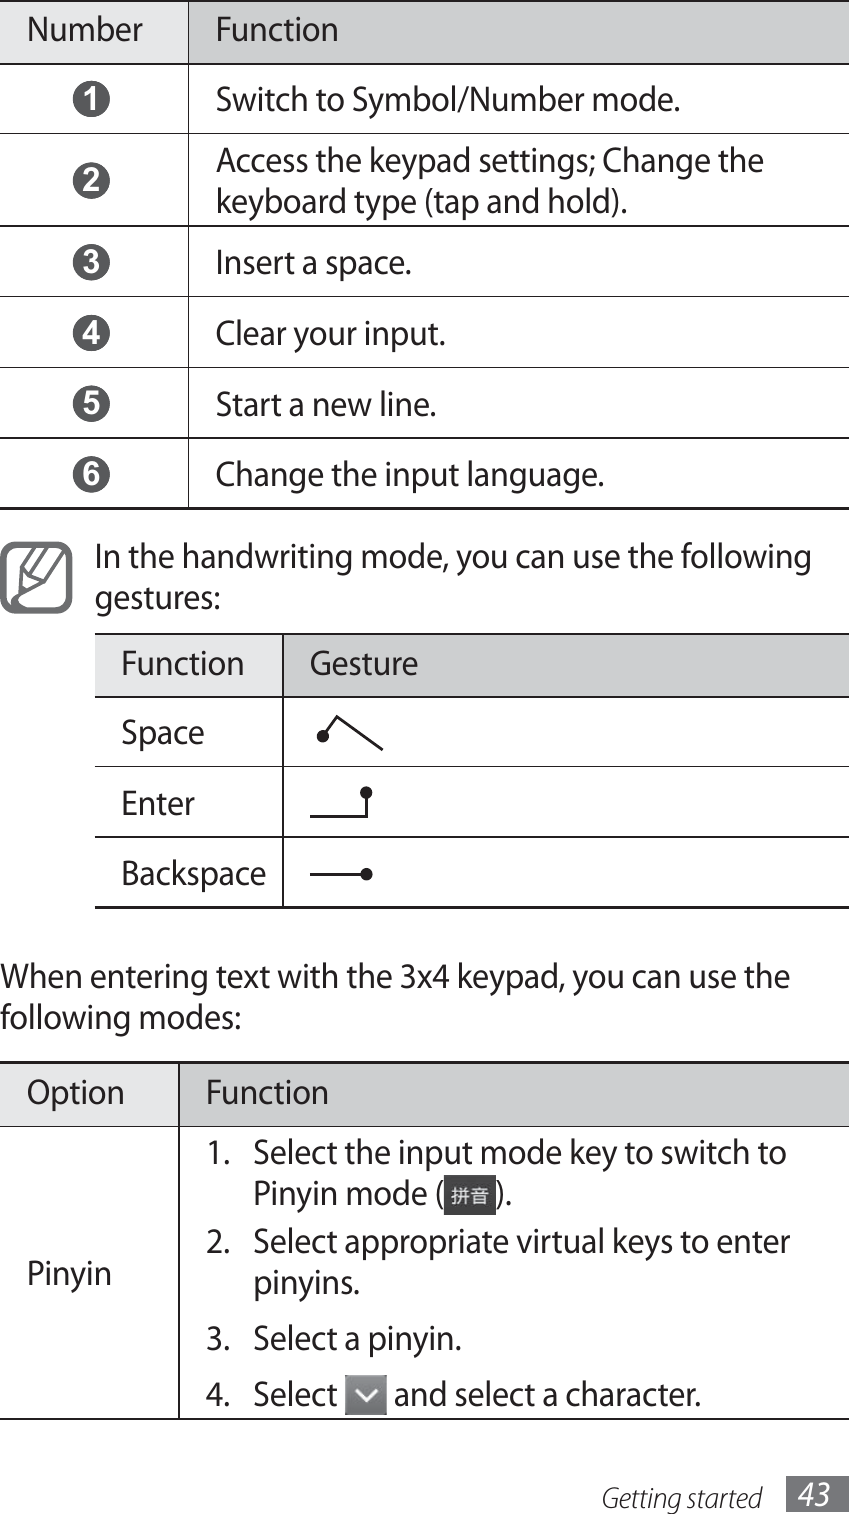 Getting started 43Number Function 1 Switch to Symbol/Number mode. 2 Access the keypad settings; Change the keyboard type (tap and hold). 3 Insert a space. 4 Clear your input. 5 Start a new line.  6 Change the input language.In the handwriting mode, you can use the following gestures:Function GestureSpace  Enter  BackspaceWhen entering text with the 3x4 keypad, you can use the following modes:Option FunctionPinyinSelect the input mode key to switch to 1. Pinyin mode ( ).Select appropriate virtual keys to enter 2. pinyins.Select a pinyin.3. Select 4.   and select a character.